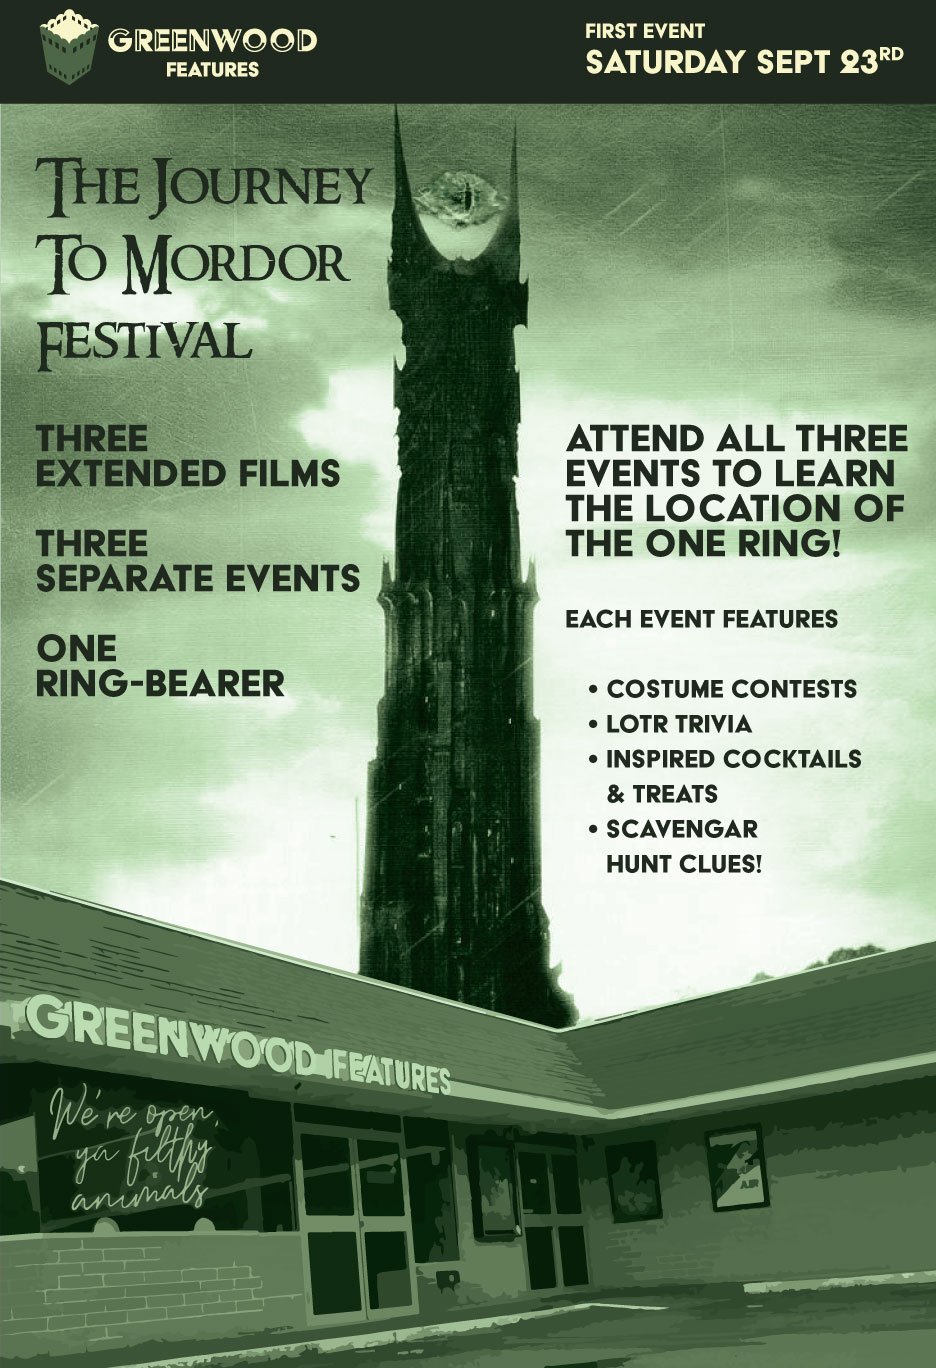 The Journey To Mordor Festival Featuring The Extended Edition of The Fellowship Of The Ring